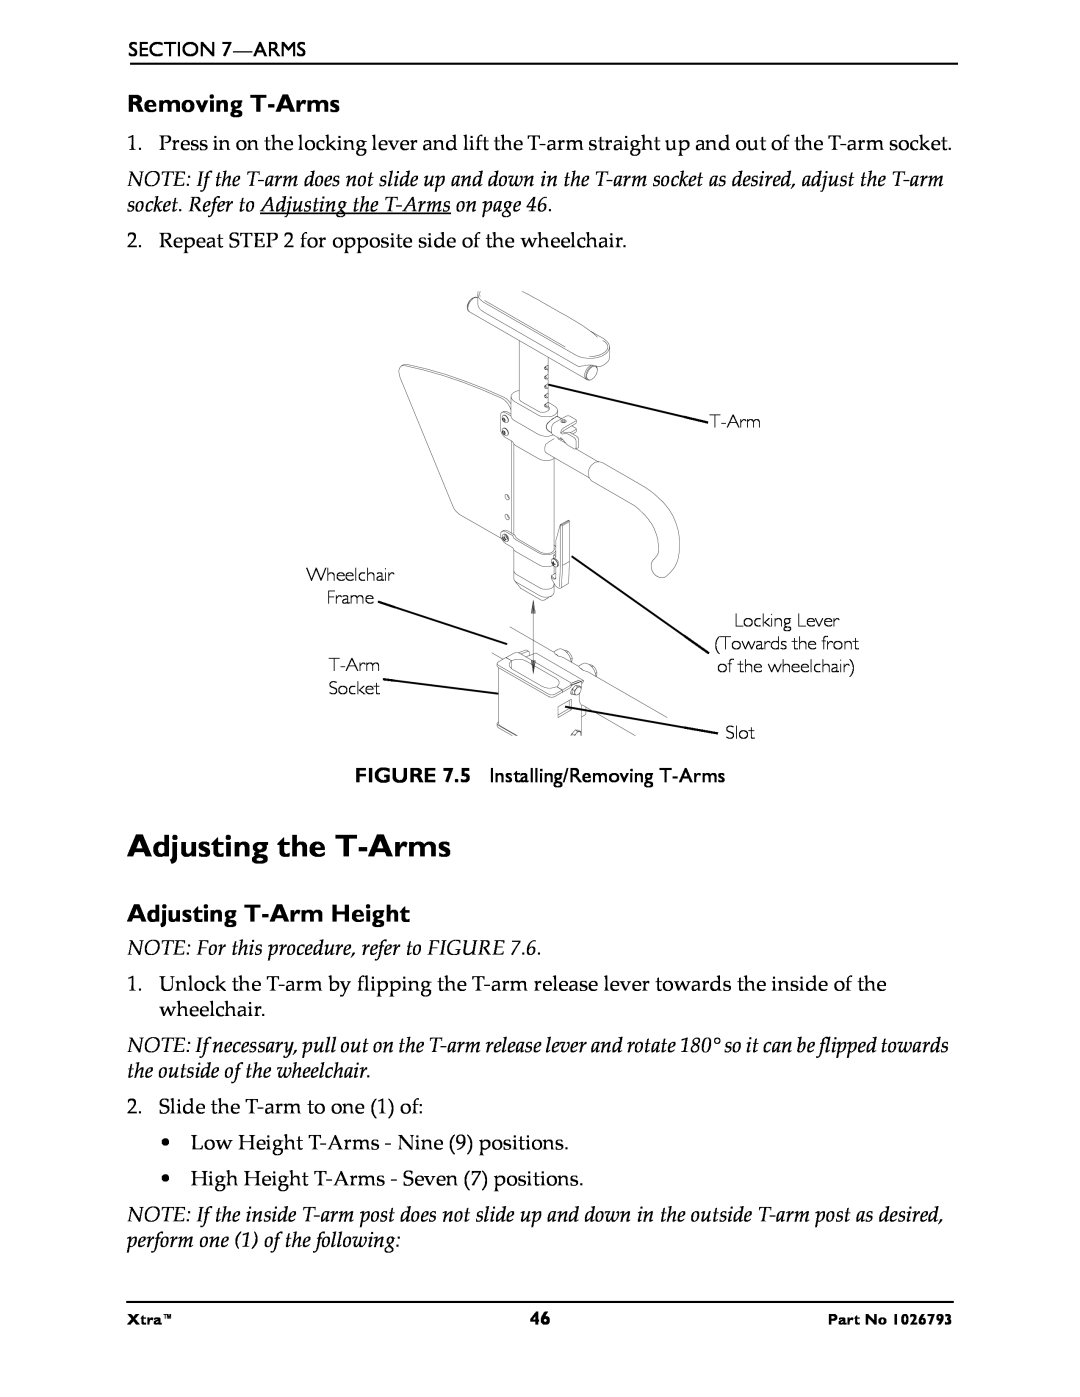 Invacare 1026793 Adjusting the T-Arms, Removing T-Arms, Adjusting T-Arm Height, NOTE For this procedure, refer to FIGURE 